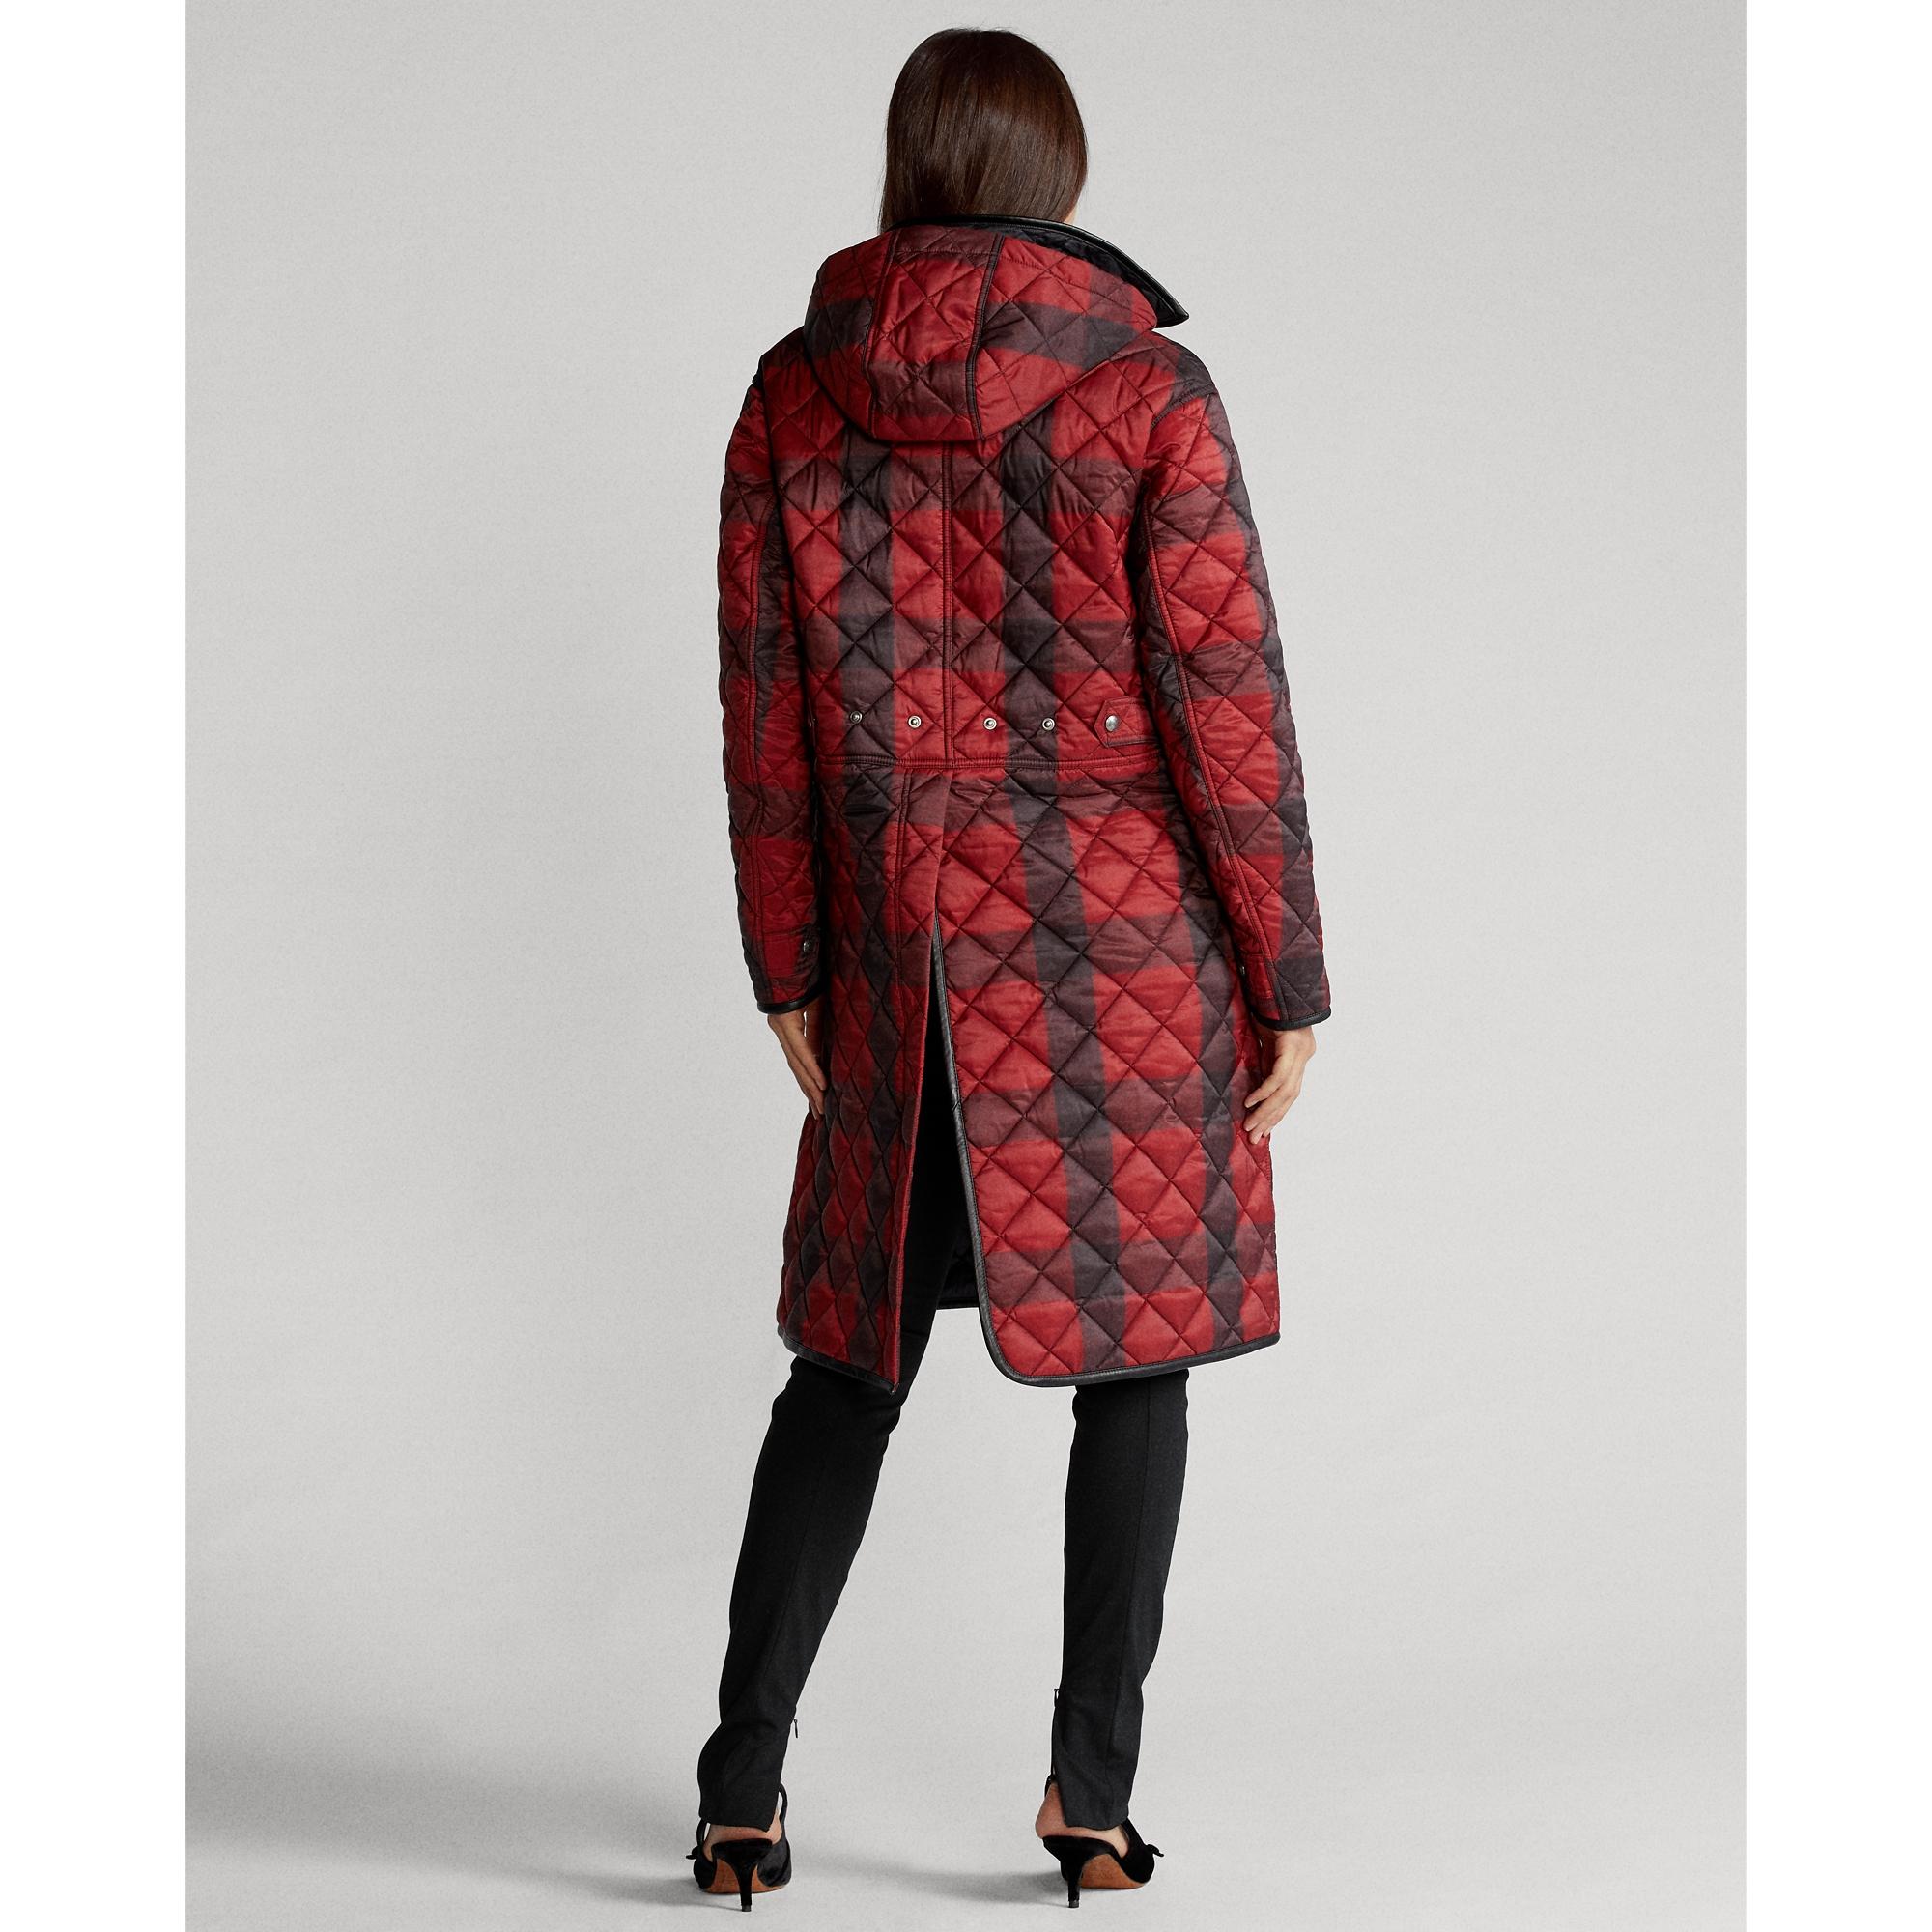 Polo Ralph Lauren Reversible Quilted Coat in Red/Black Check (Red) - Lyst